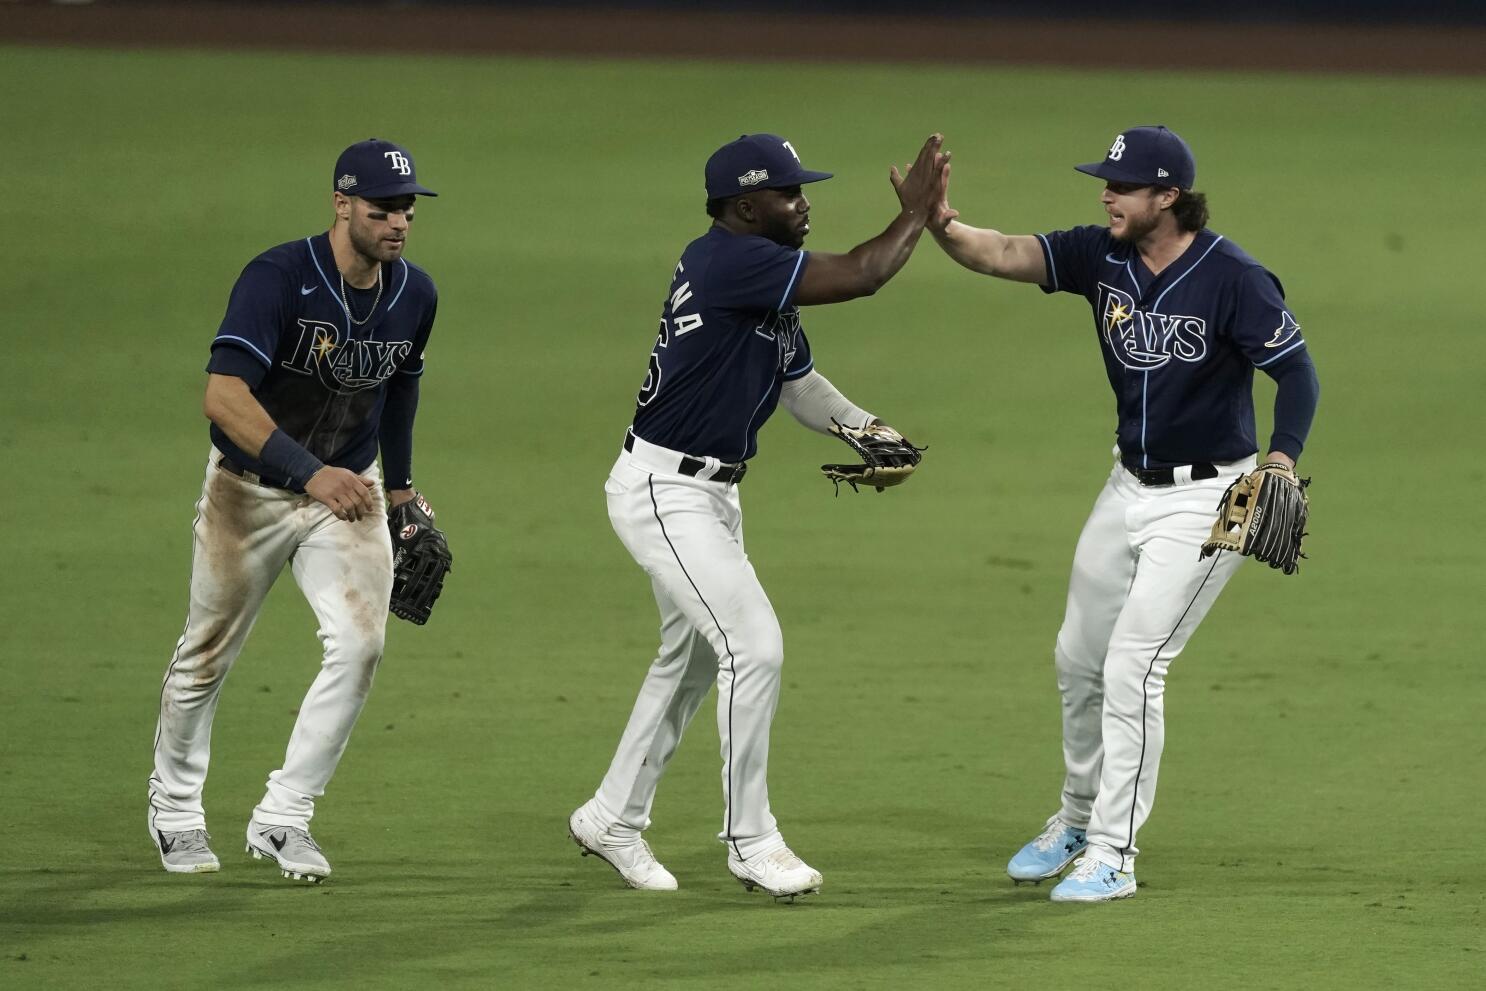 Rays' Arozarena sets record for most HRs in single postseason